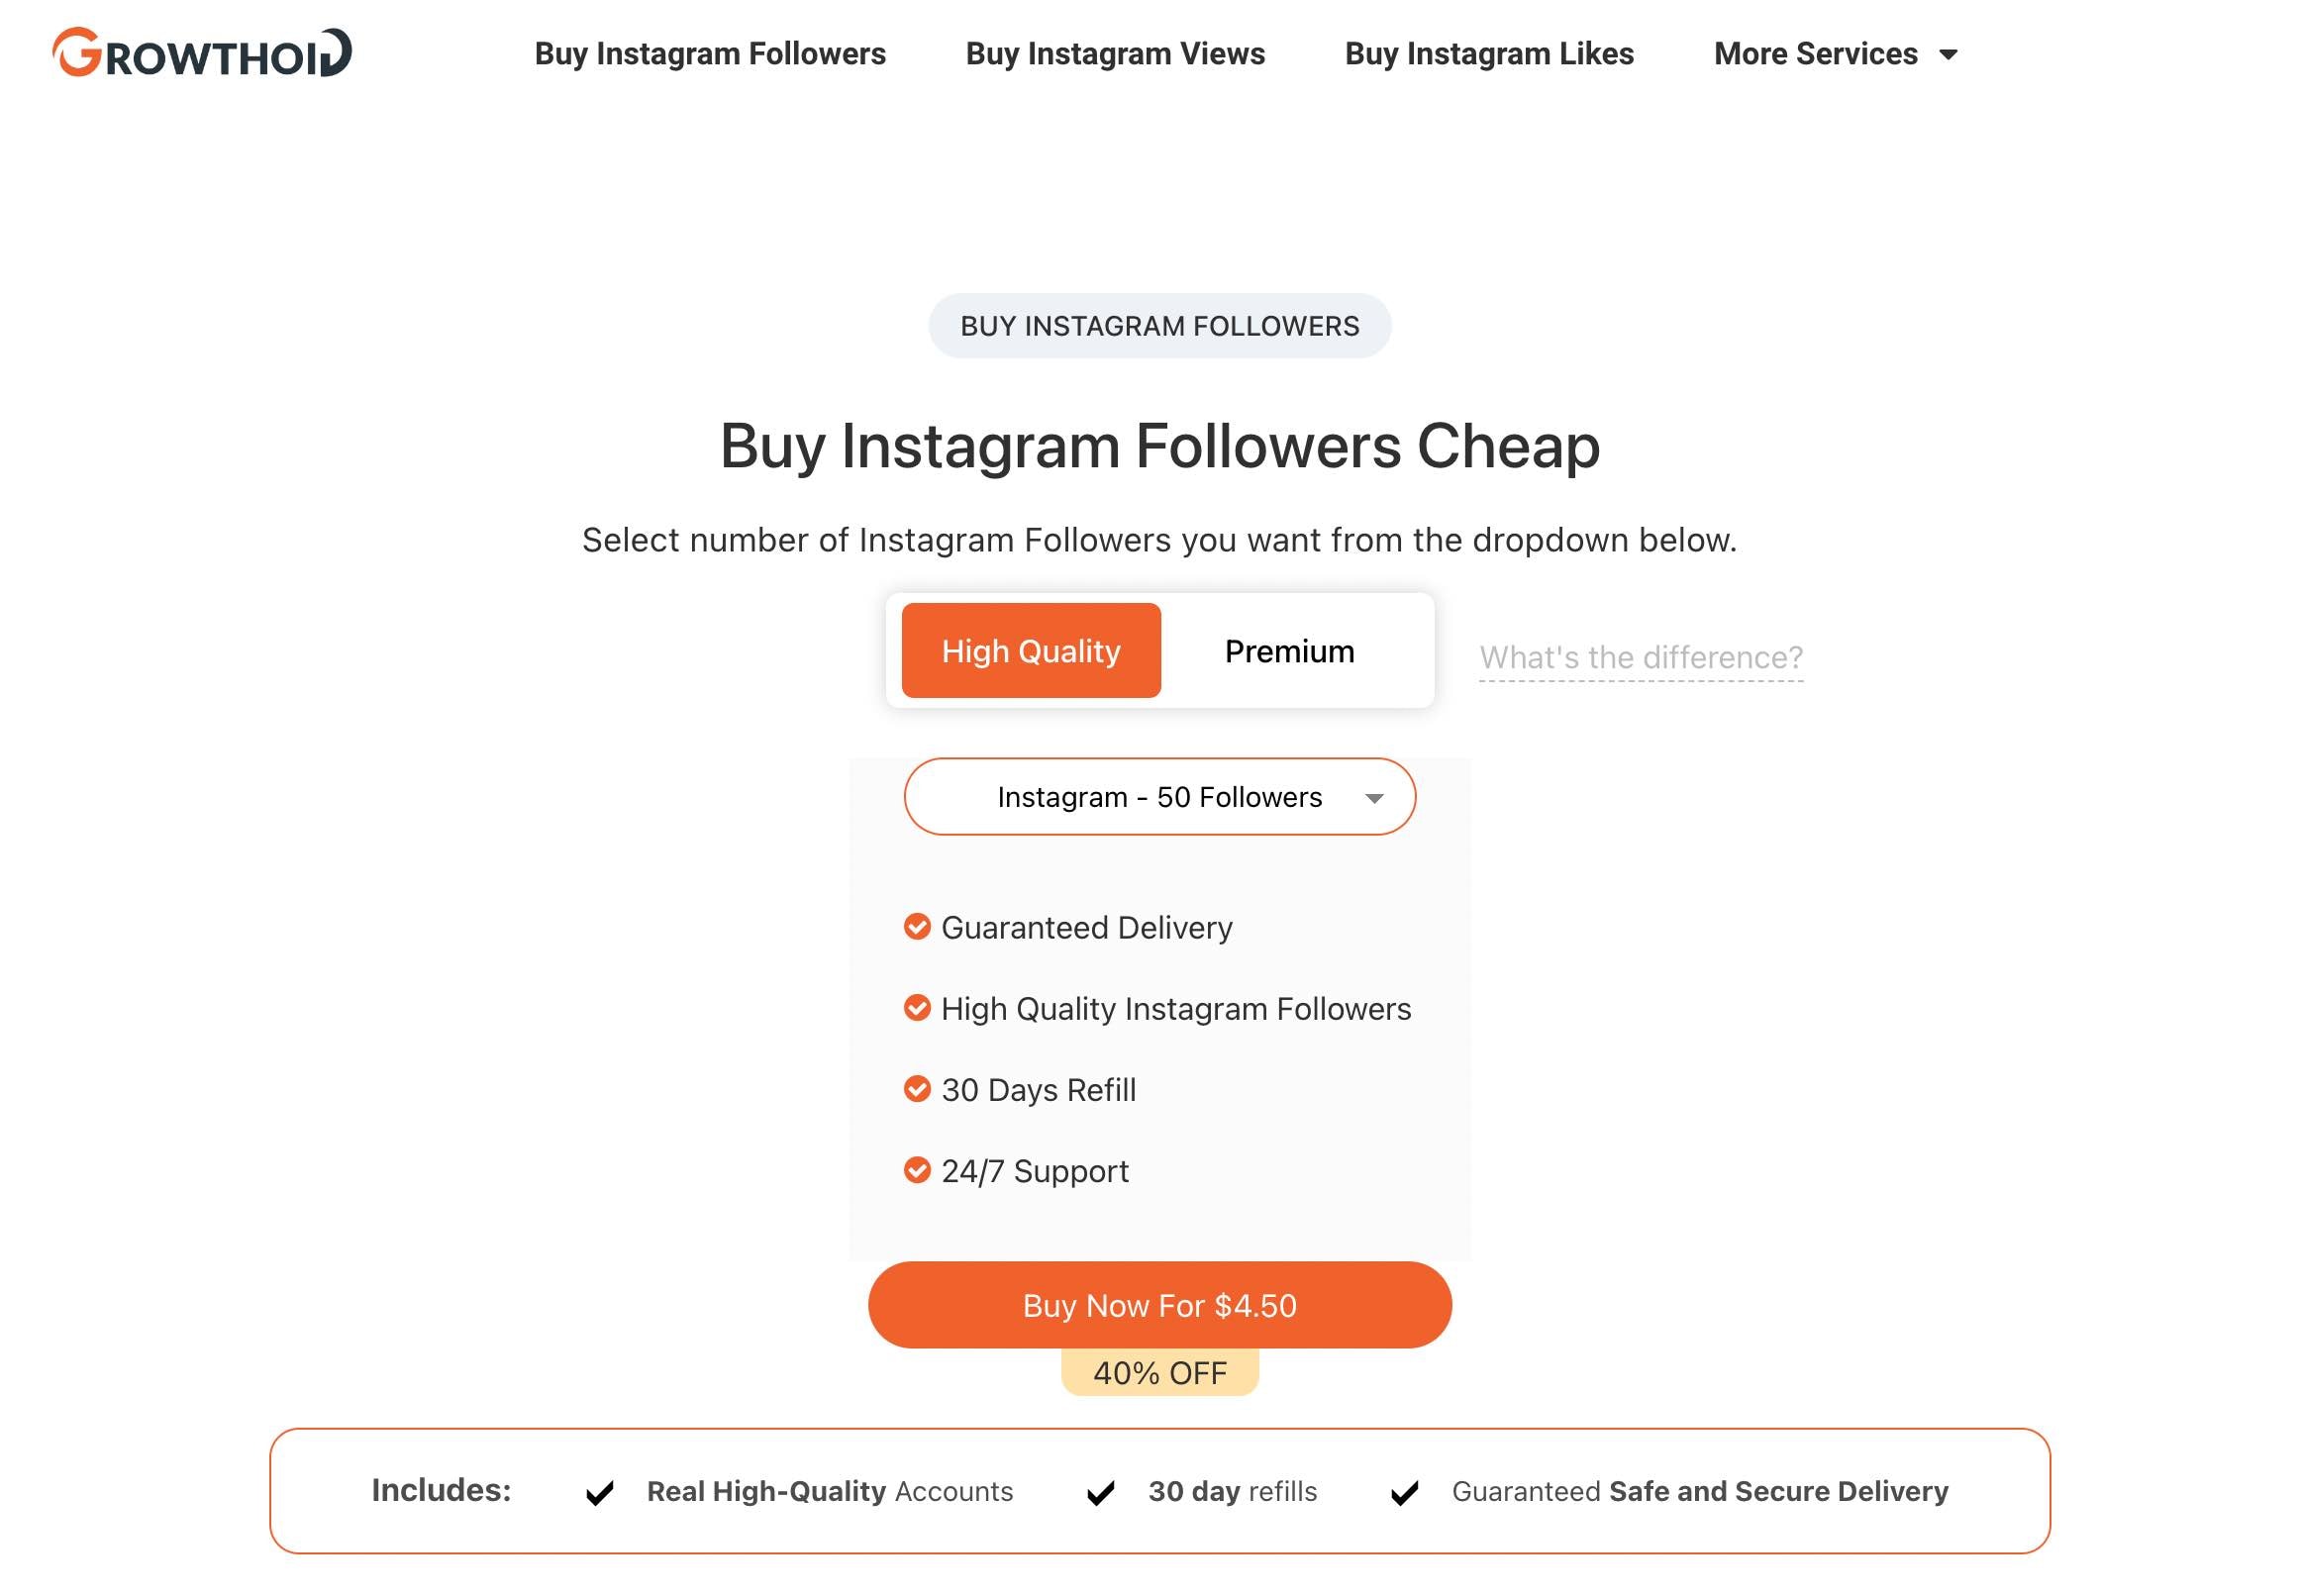 growthoid buy instagram followers serbia page